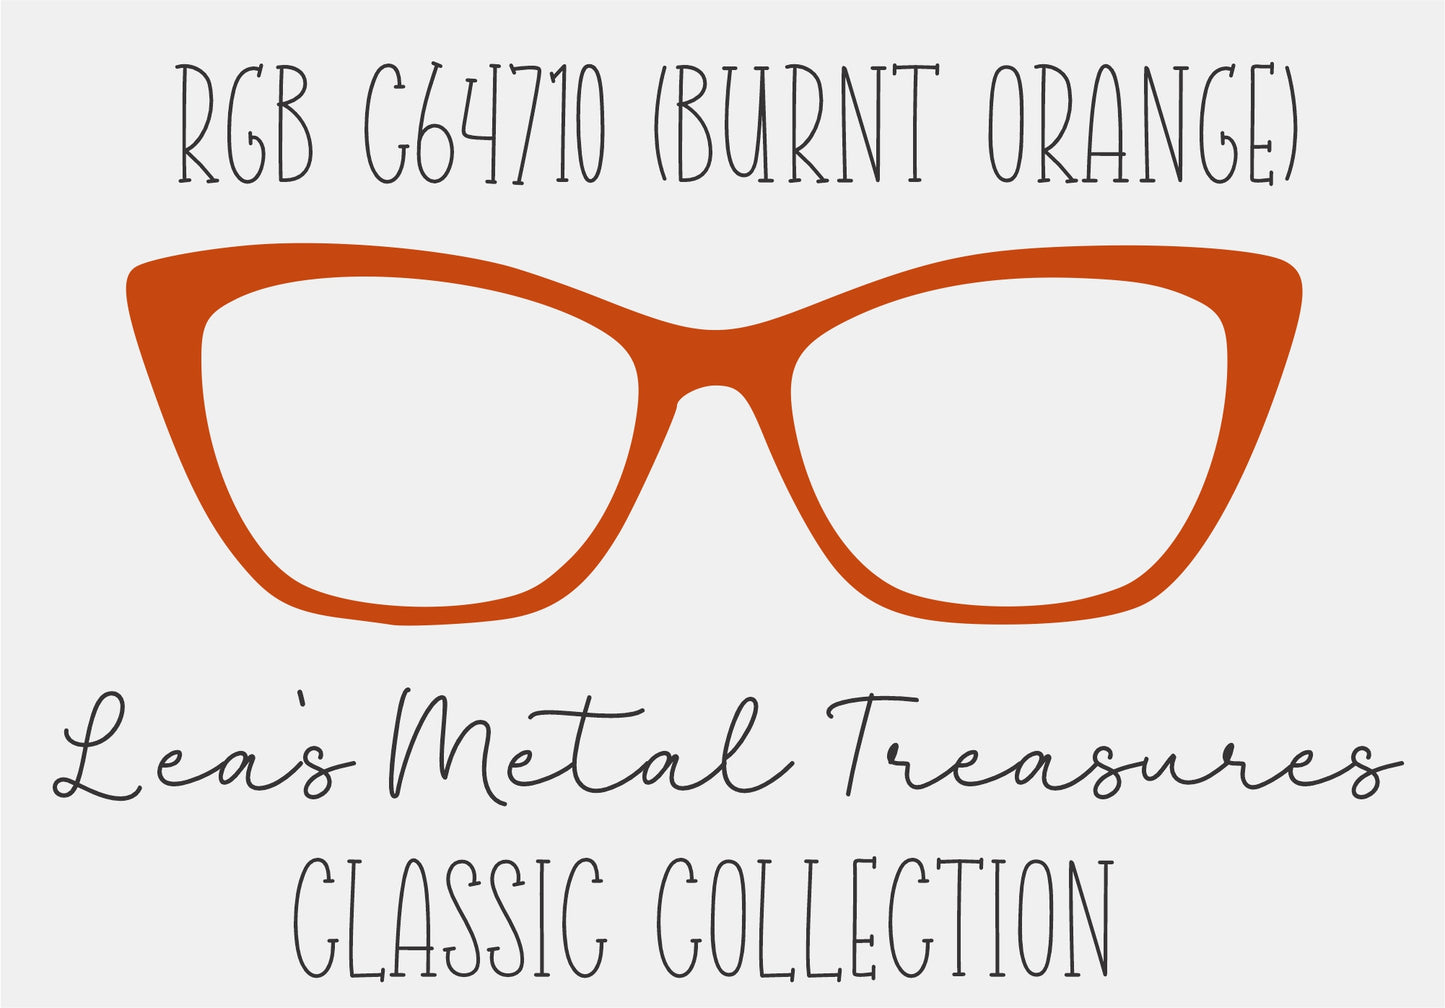 RGB C64710 Burnt Orange Eyewear Frame Toppers COMES WITH MAGNETS